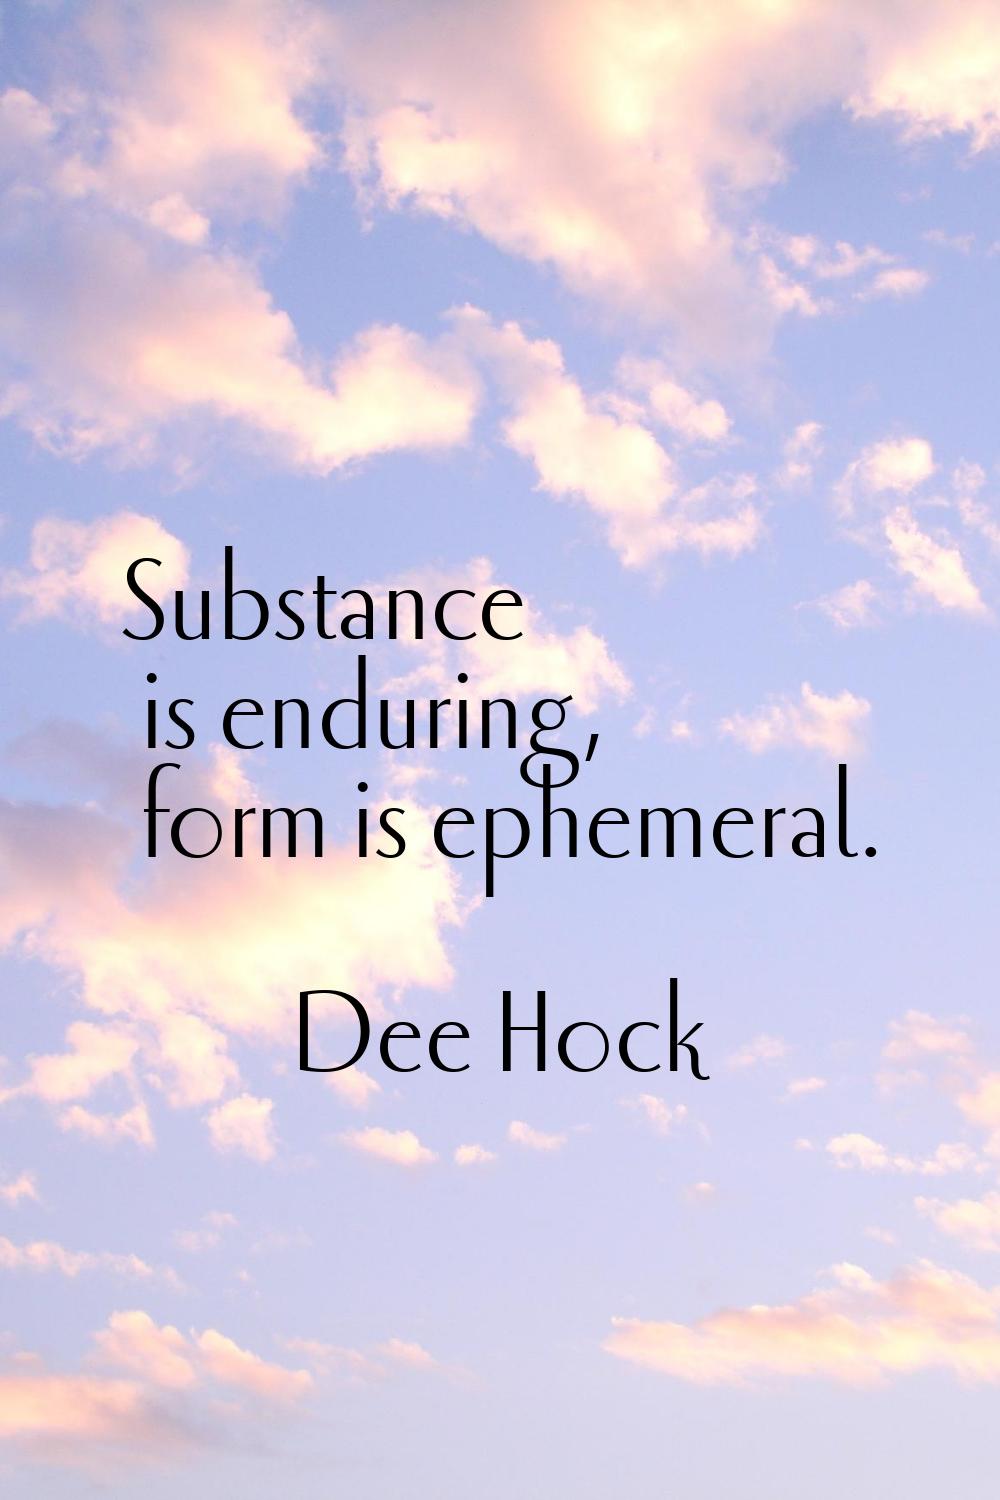 Substance is enduring, form is ephemeral.